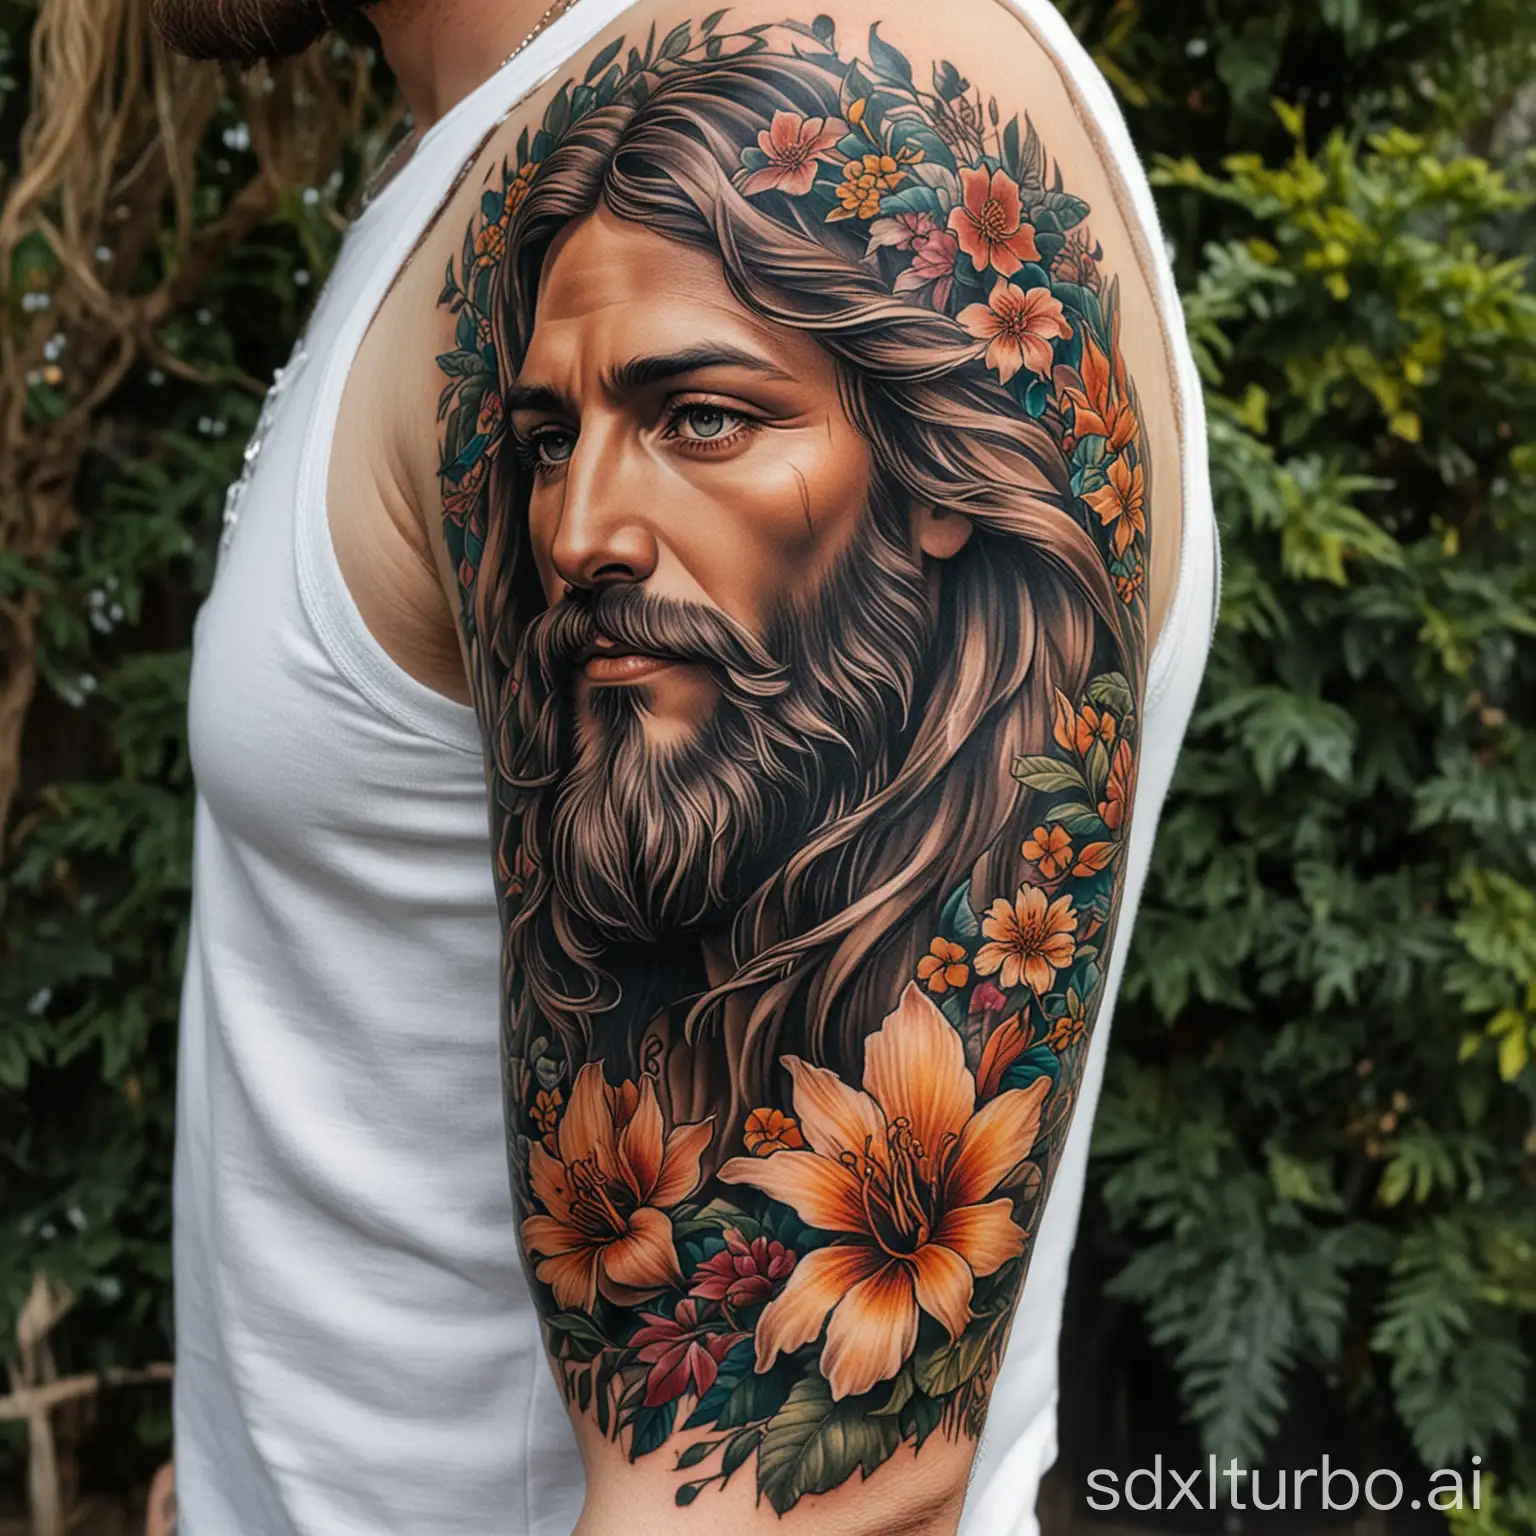 Envision a captivating full-arm tattoo featuring a majestic portrayal of Jesus with flowing hair and a beard, set amidst a lush landscape of intricate flowers, birds, and symbolic animals. The design seamlessly blends traditional tattoo techniques with modern aesthetics, using bold colors and shading to create a visually dynamic and spiritually evocative composition.